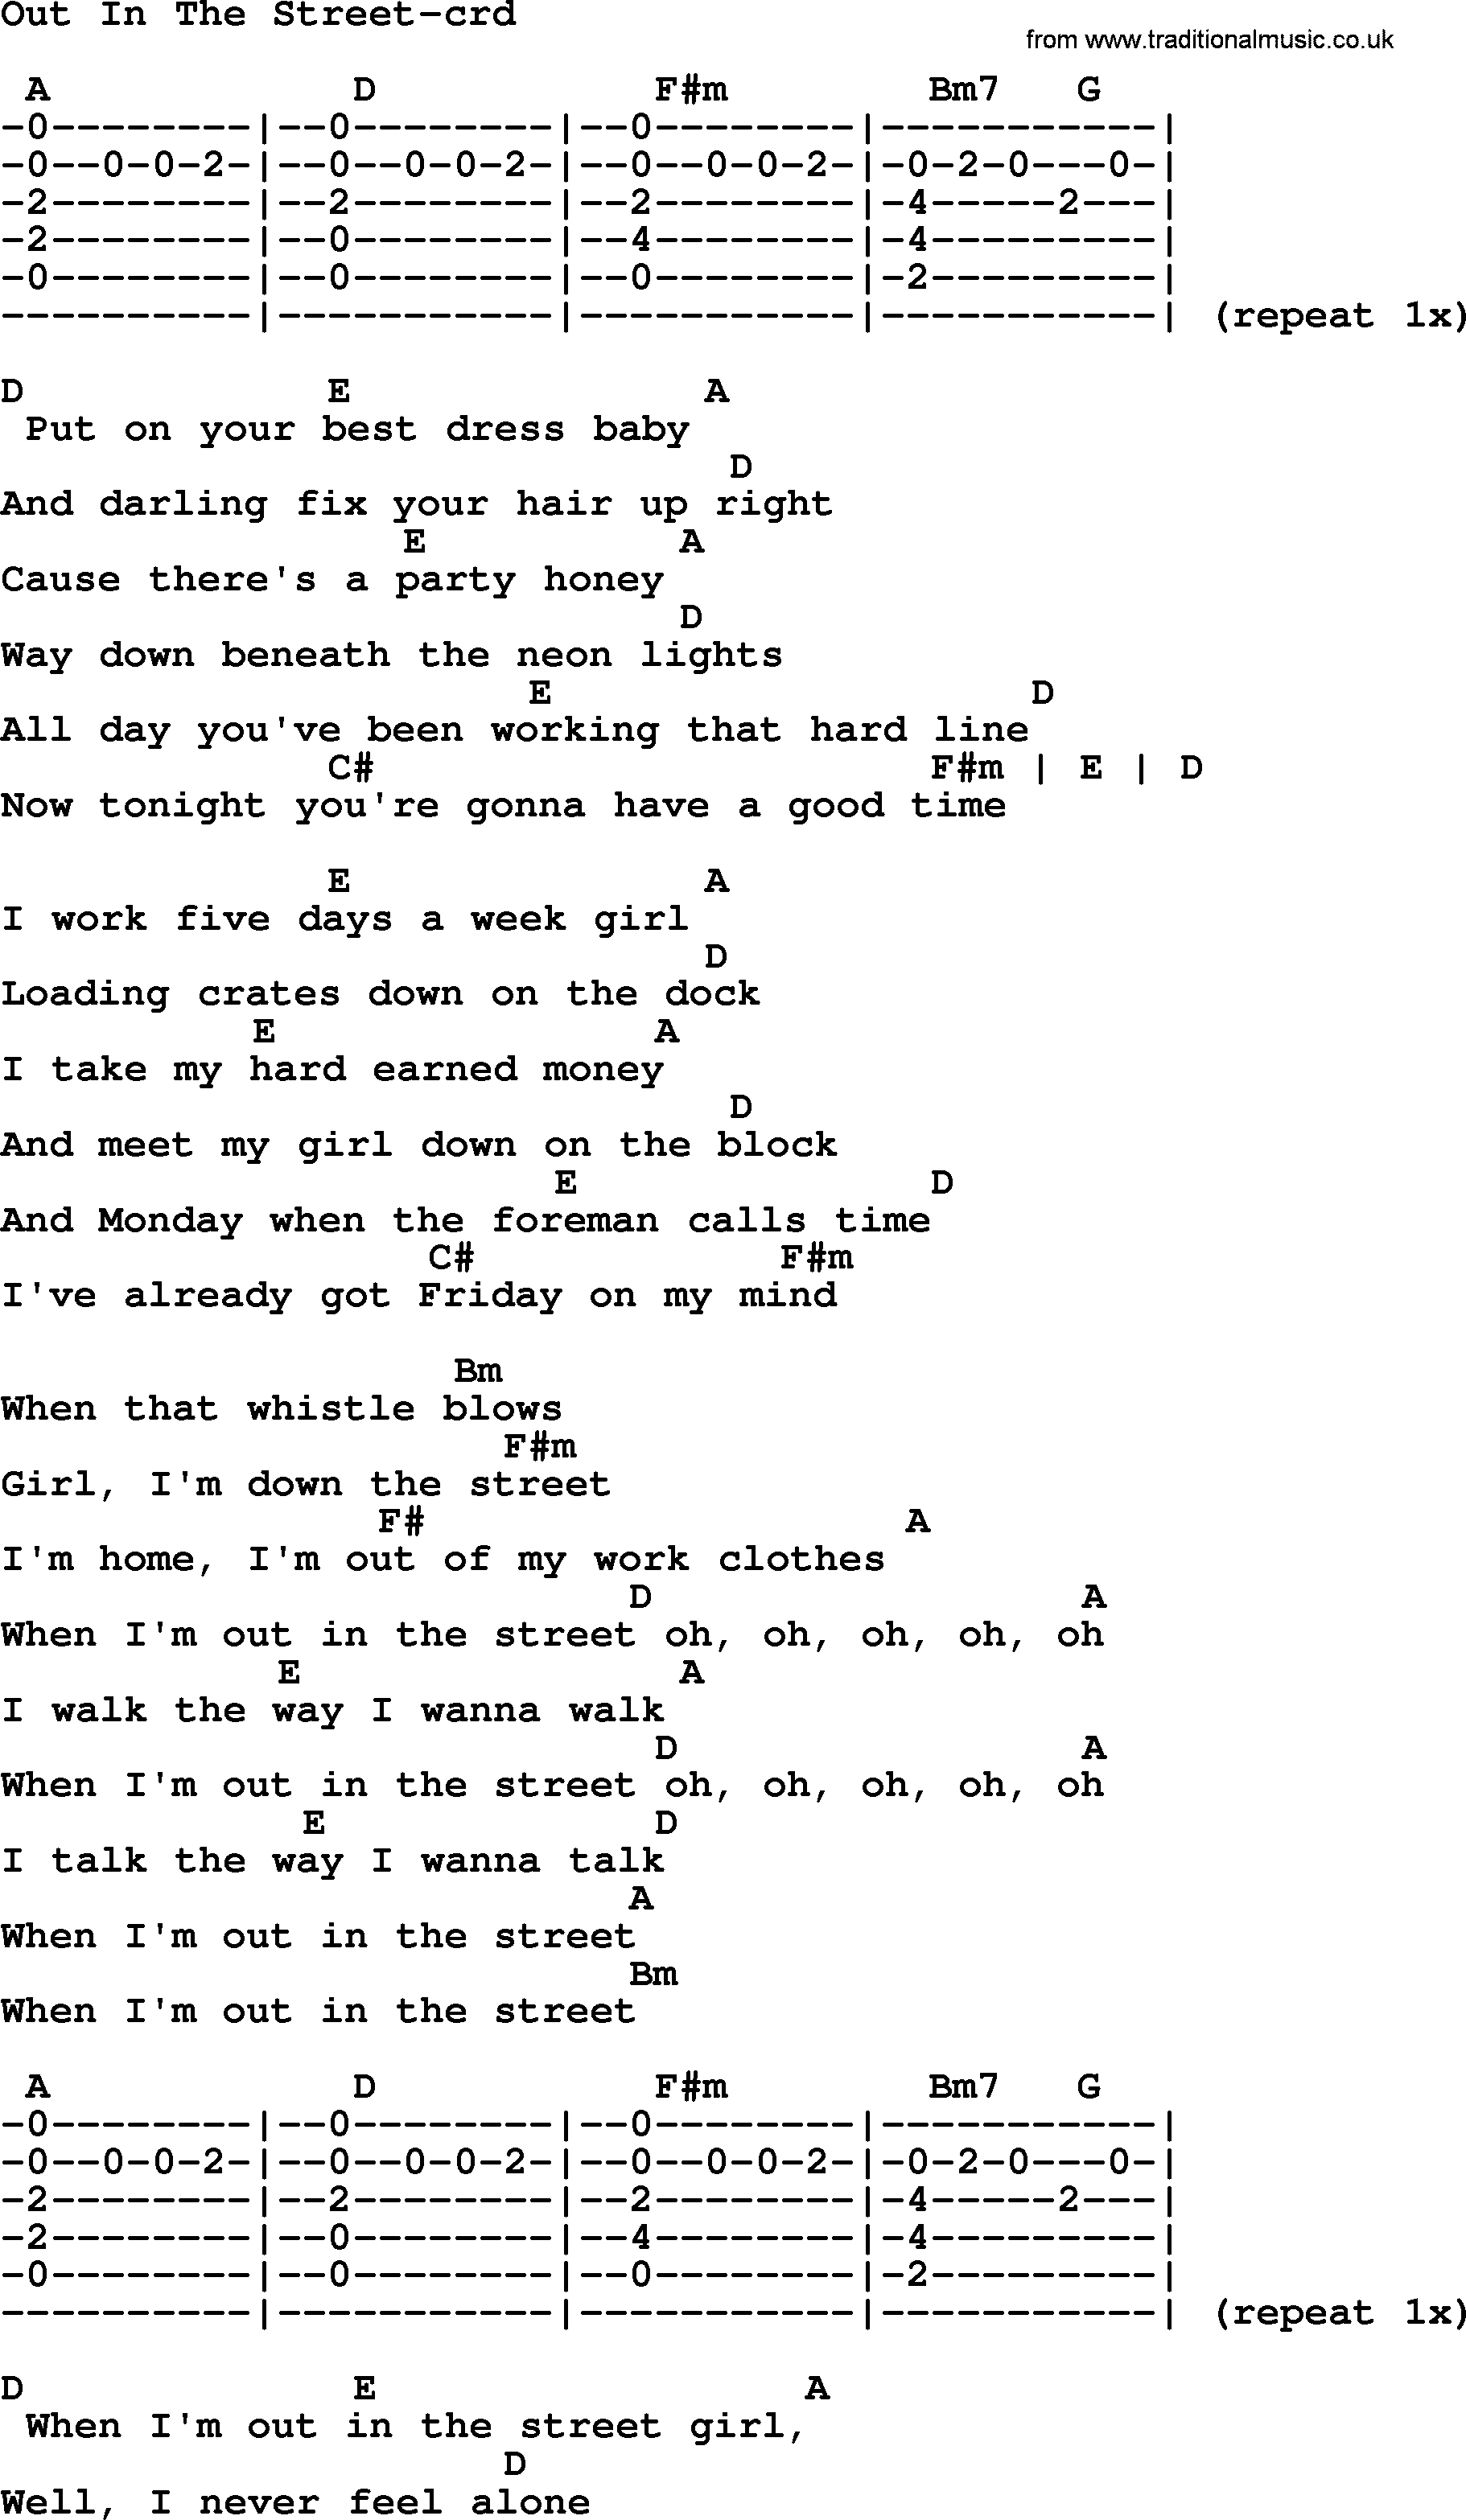 Bruce Springsteen Song Out In The Street Lyrics And Chords